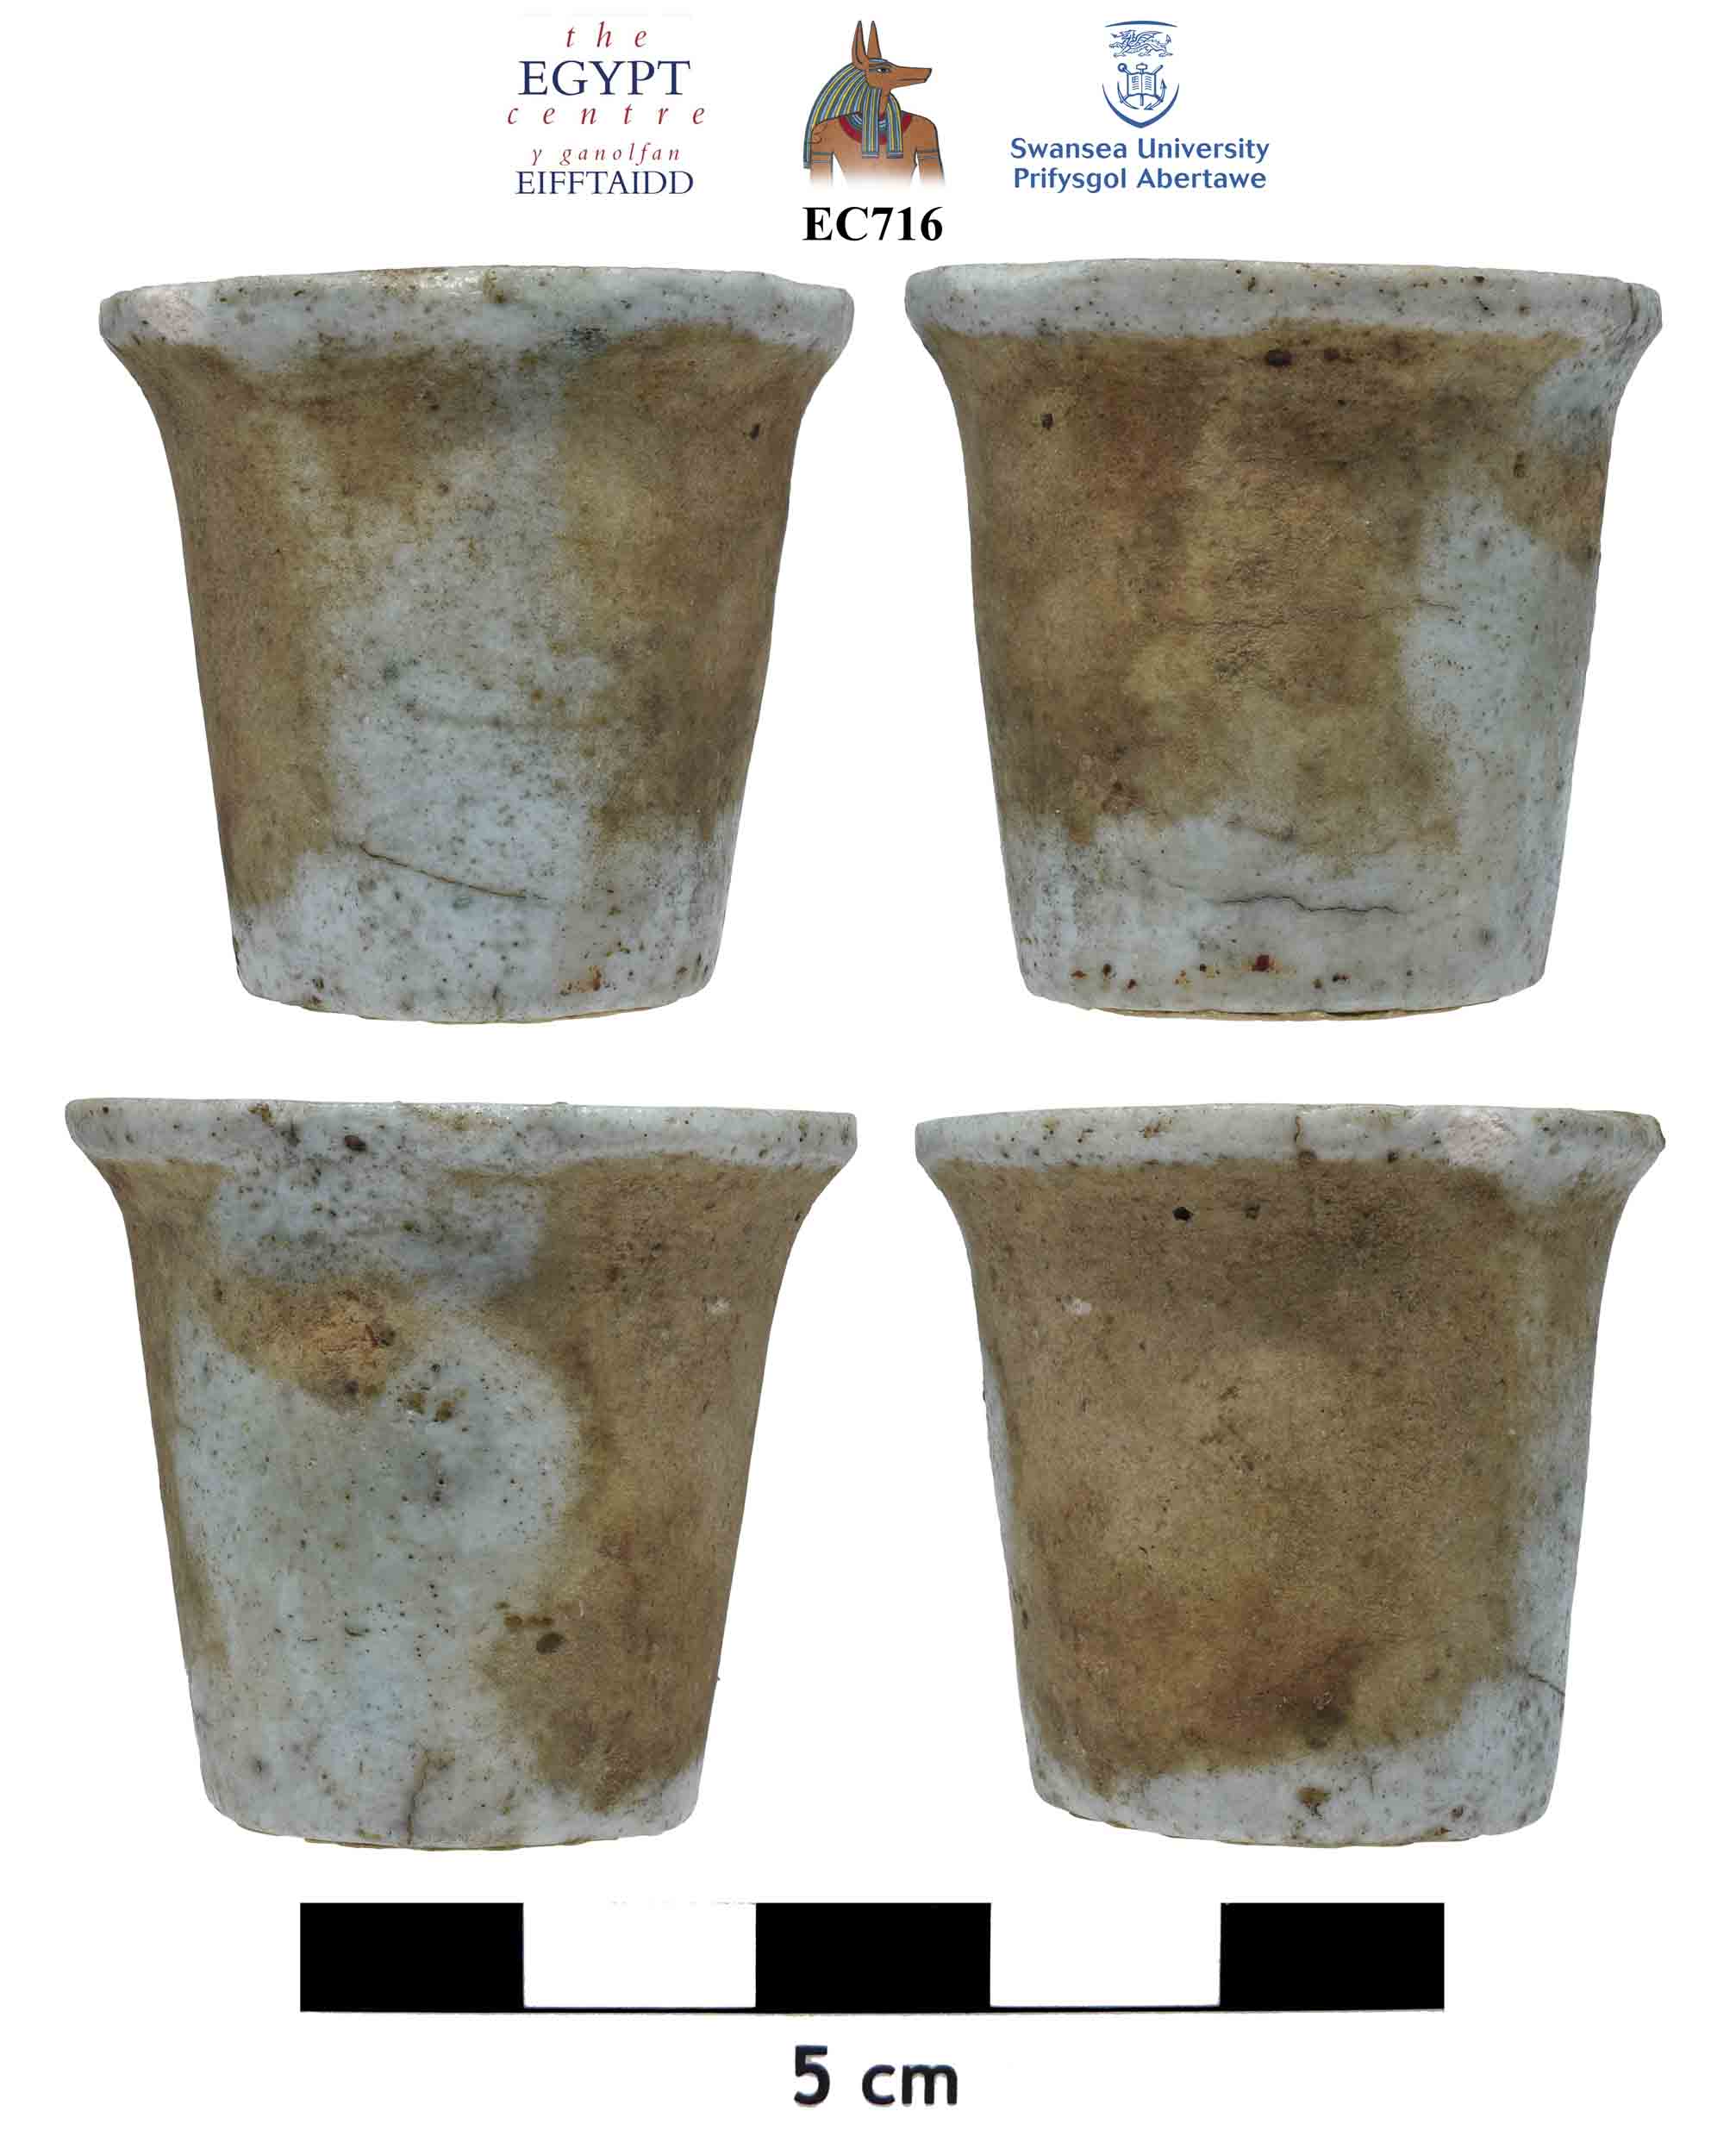 Image for: Faience vessel